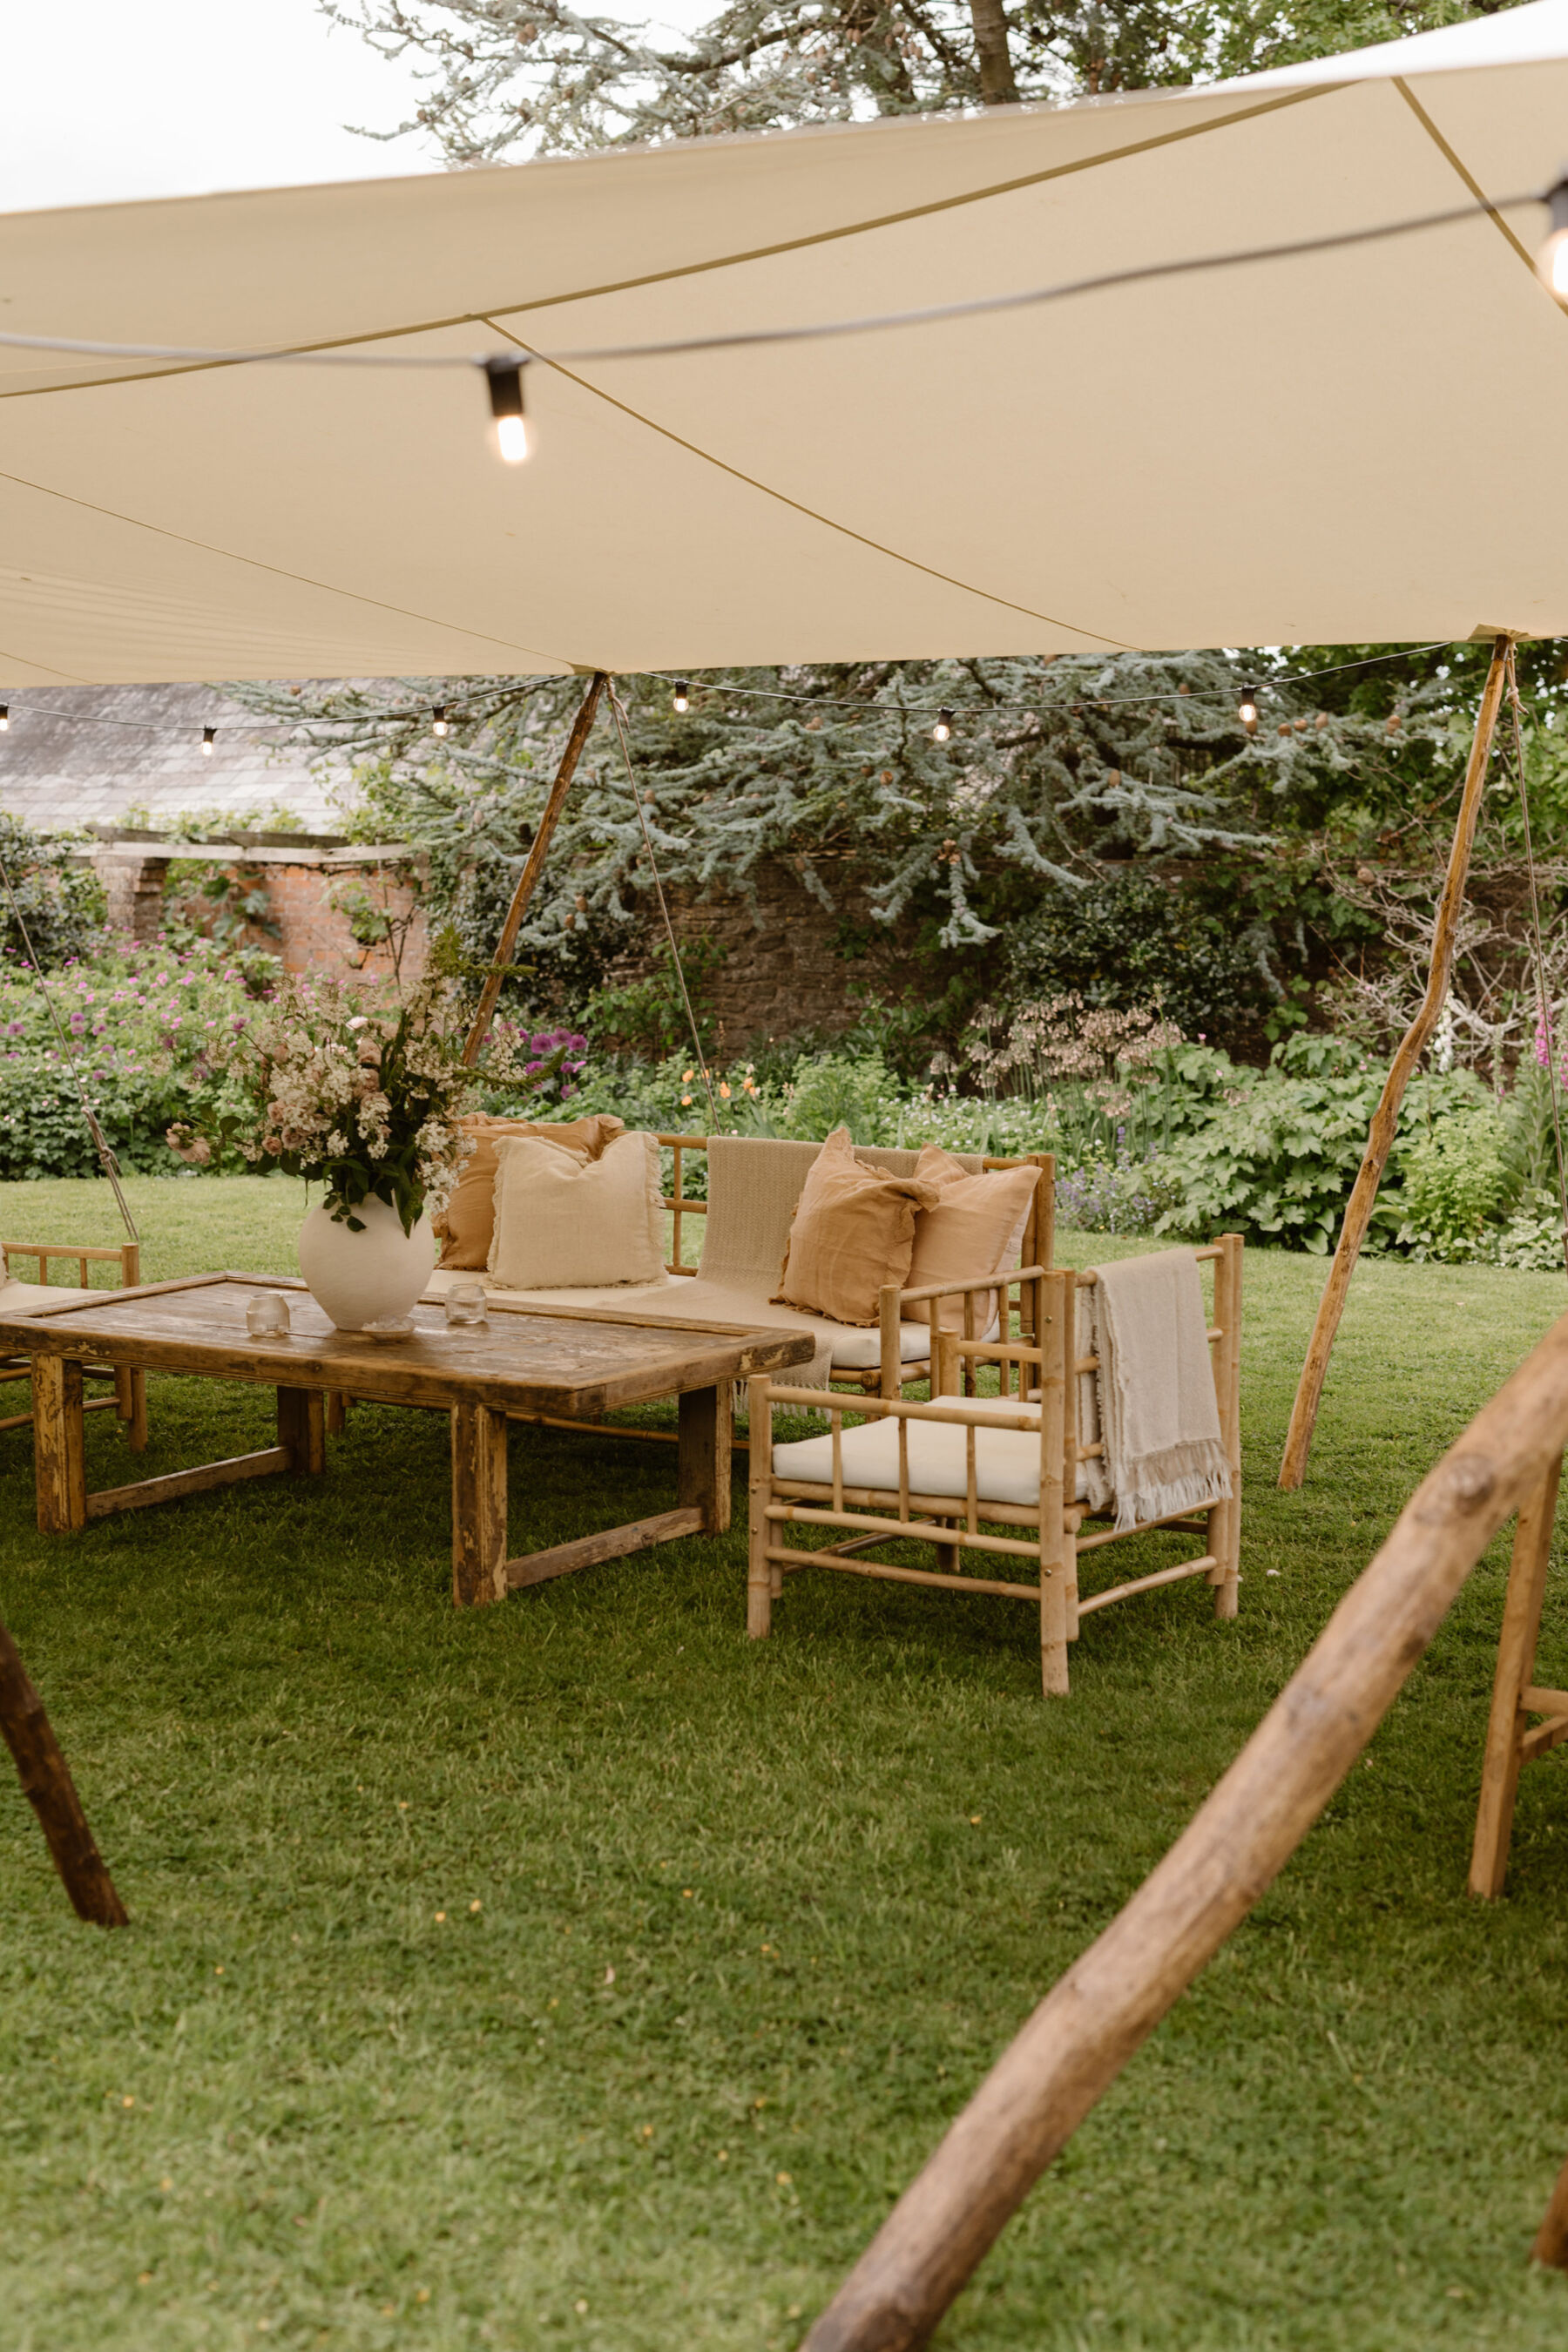 Outdoor seating for wedding guests. Agnes Black Photography.